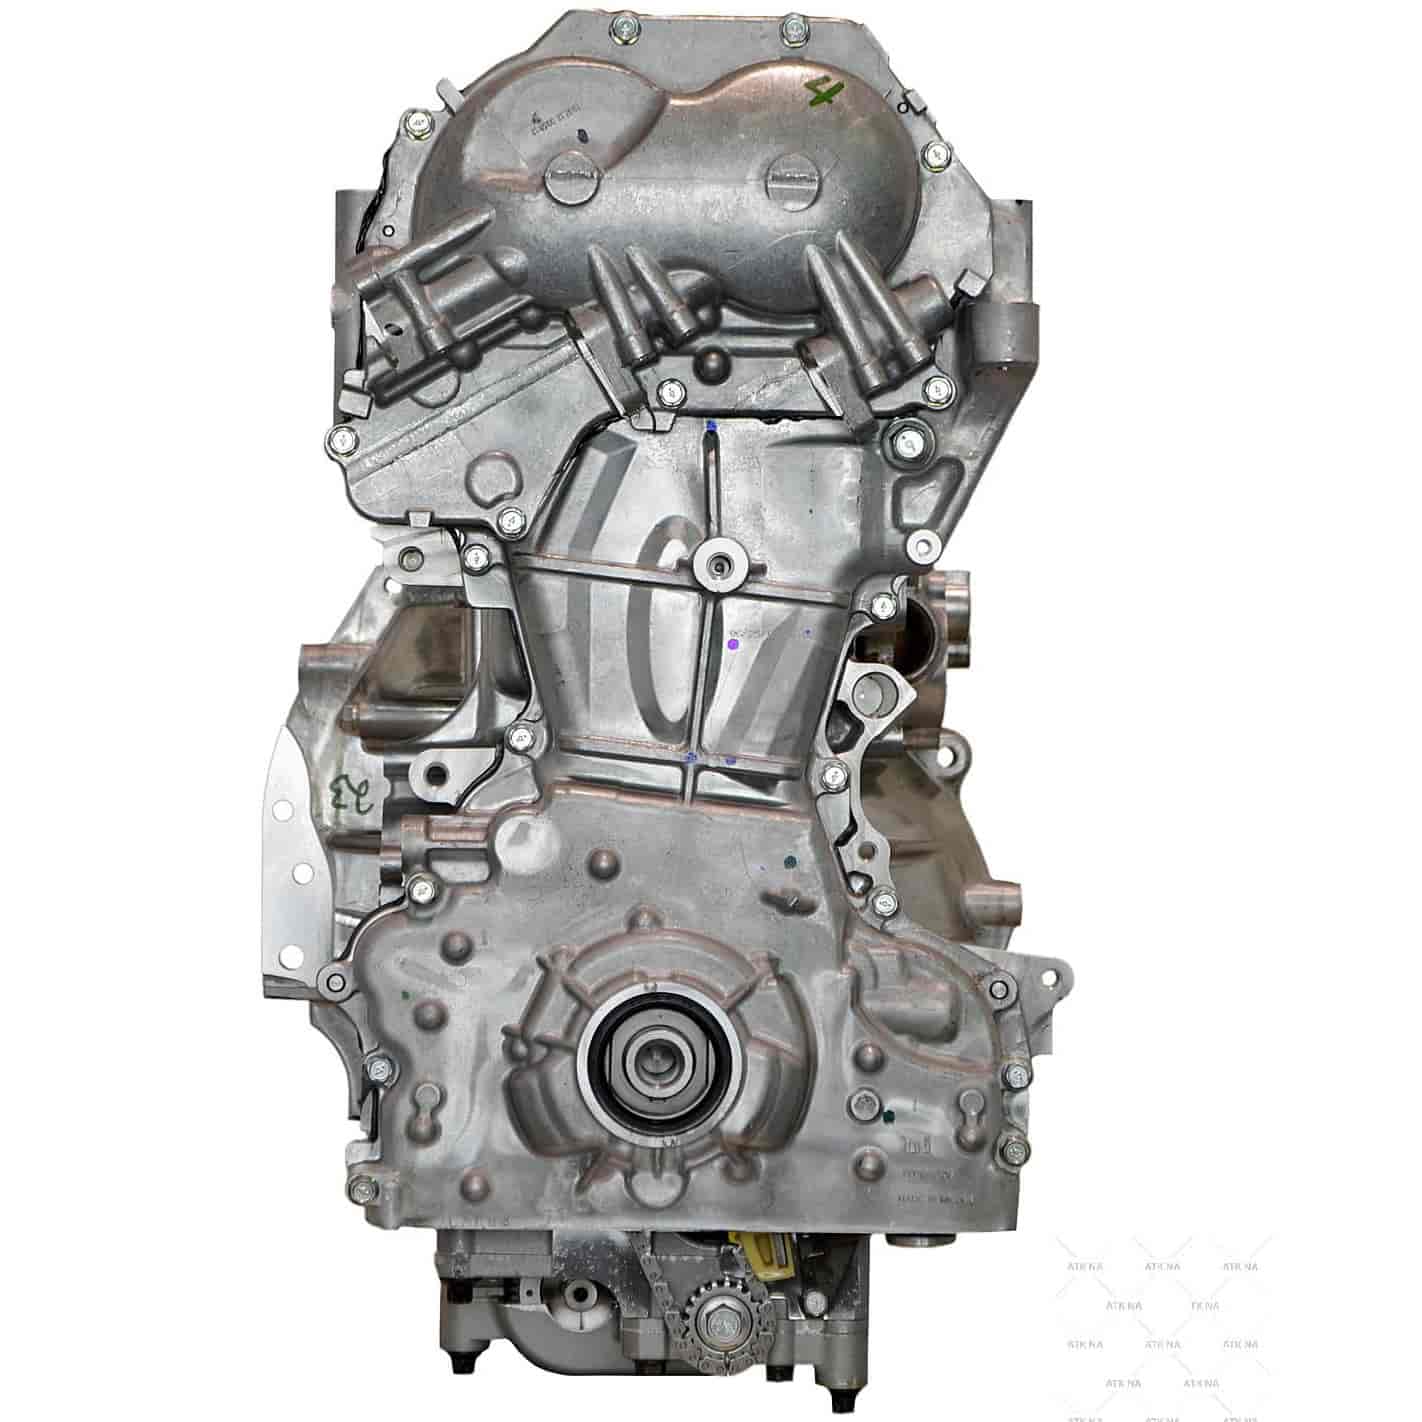 Remanufactured Crate Engine for 2012-2018 fits Nissan Altima